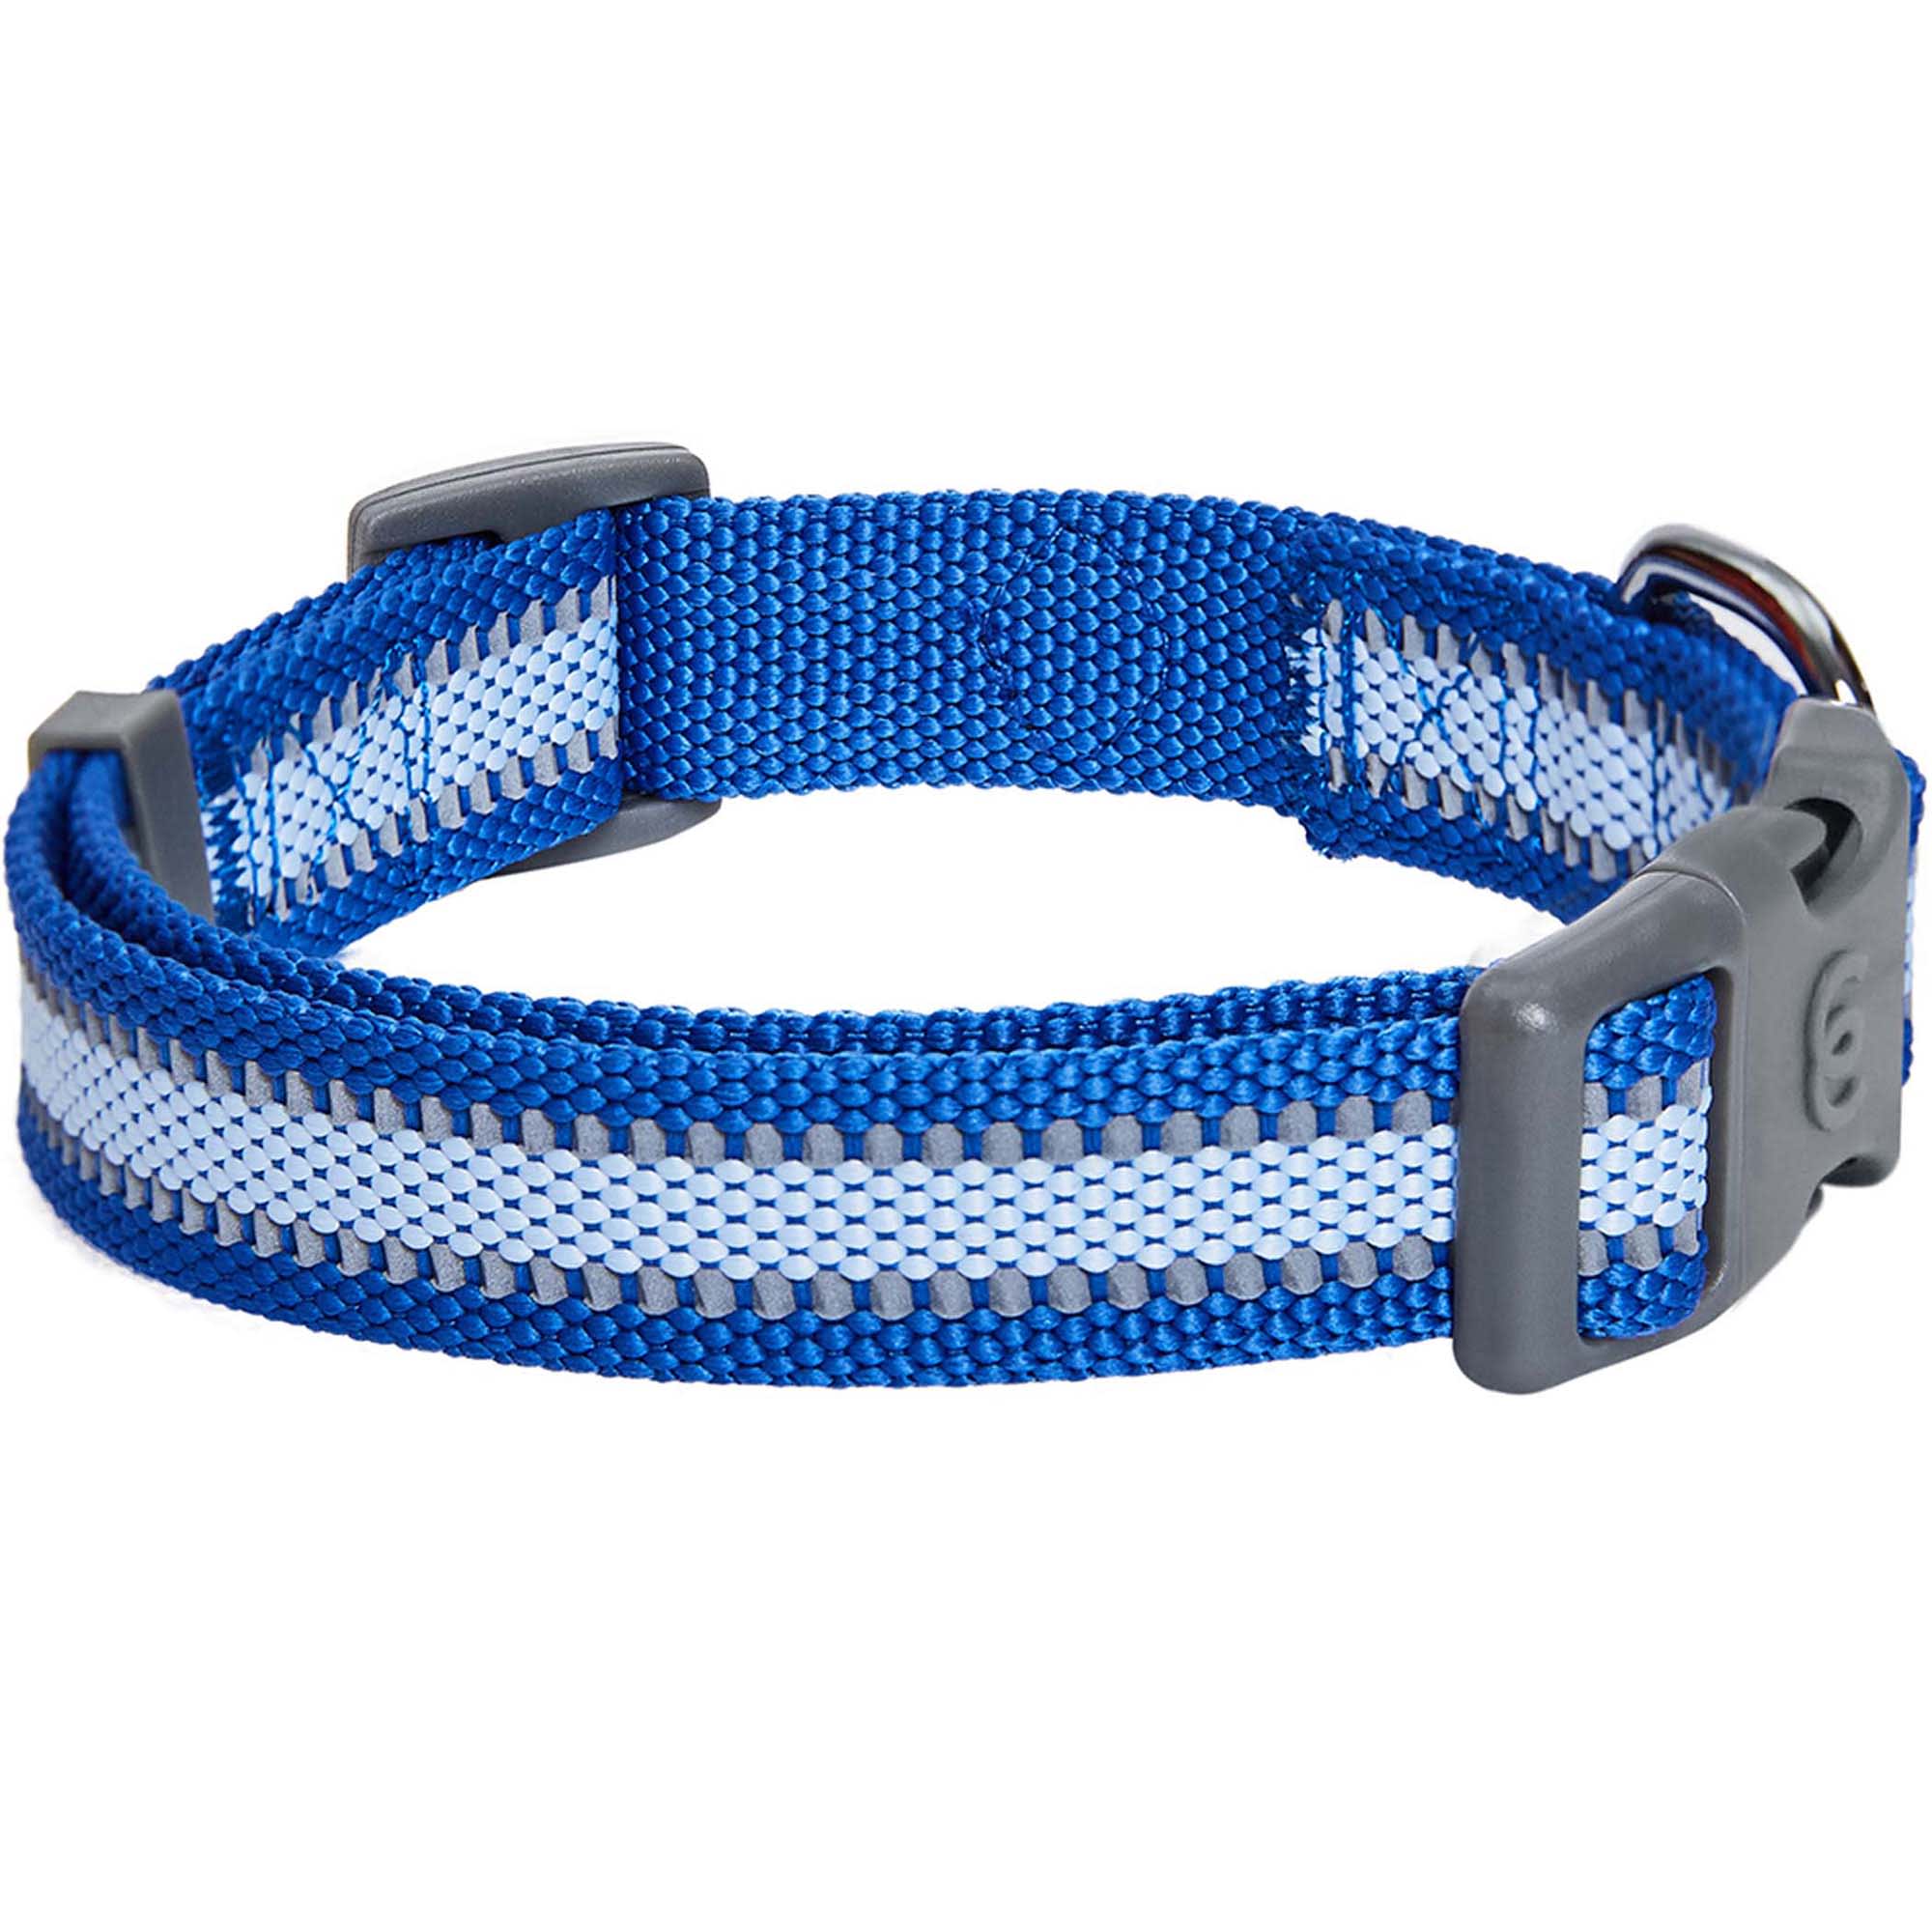 Teal Blue for Large Breed Blueberry Pet 9 Colors Soft & Safe 3M Reflective Jacquard Neoprene Padded Adjustable Dog Collar with Metal Buckle Neck 17-20.5 